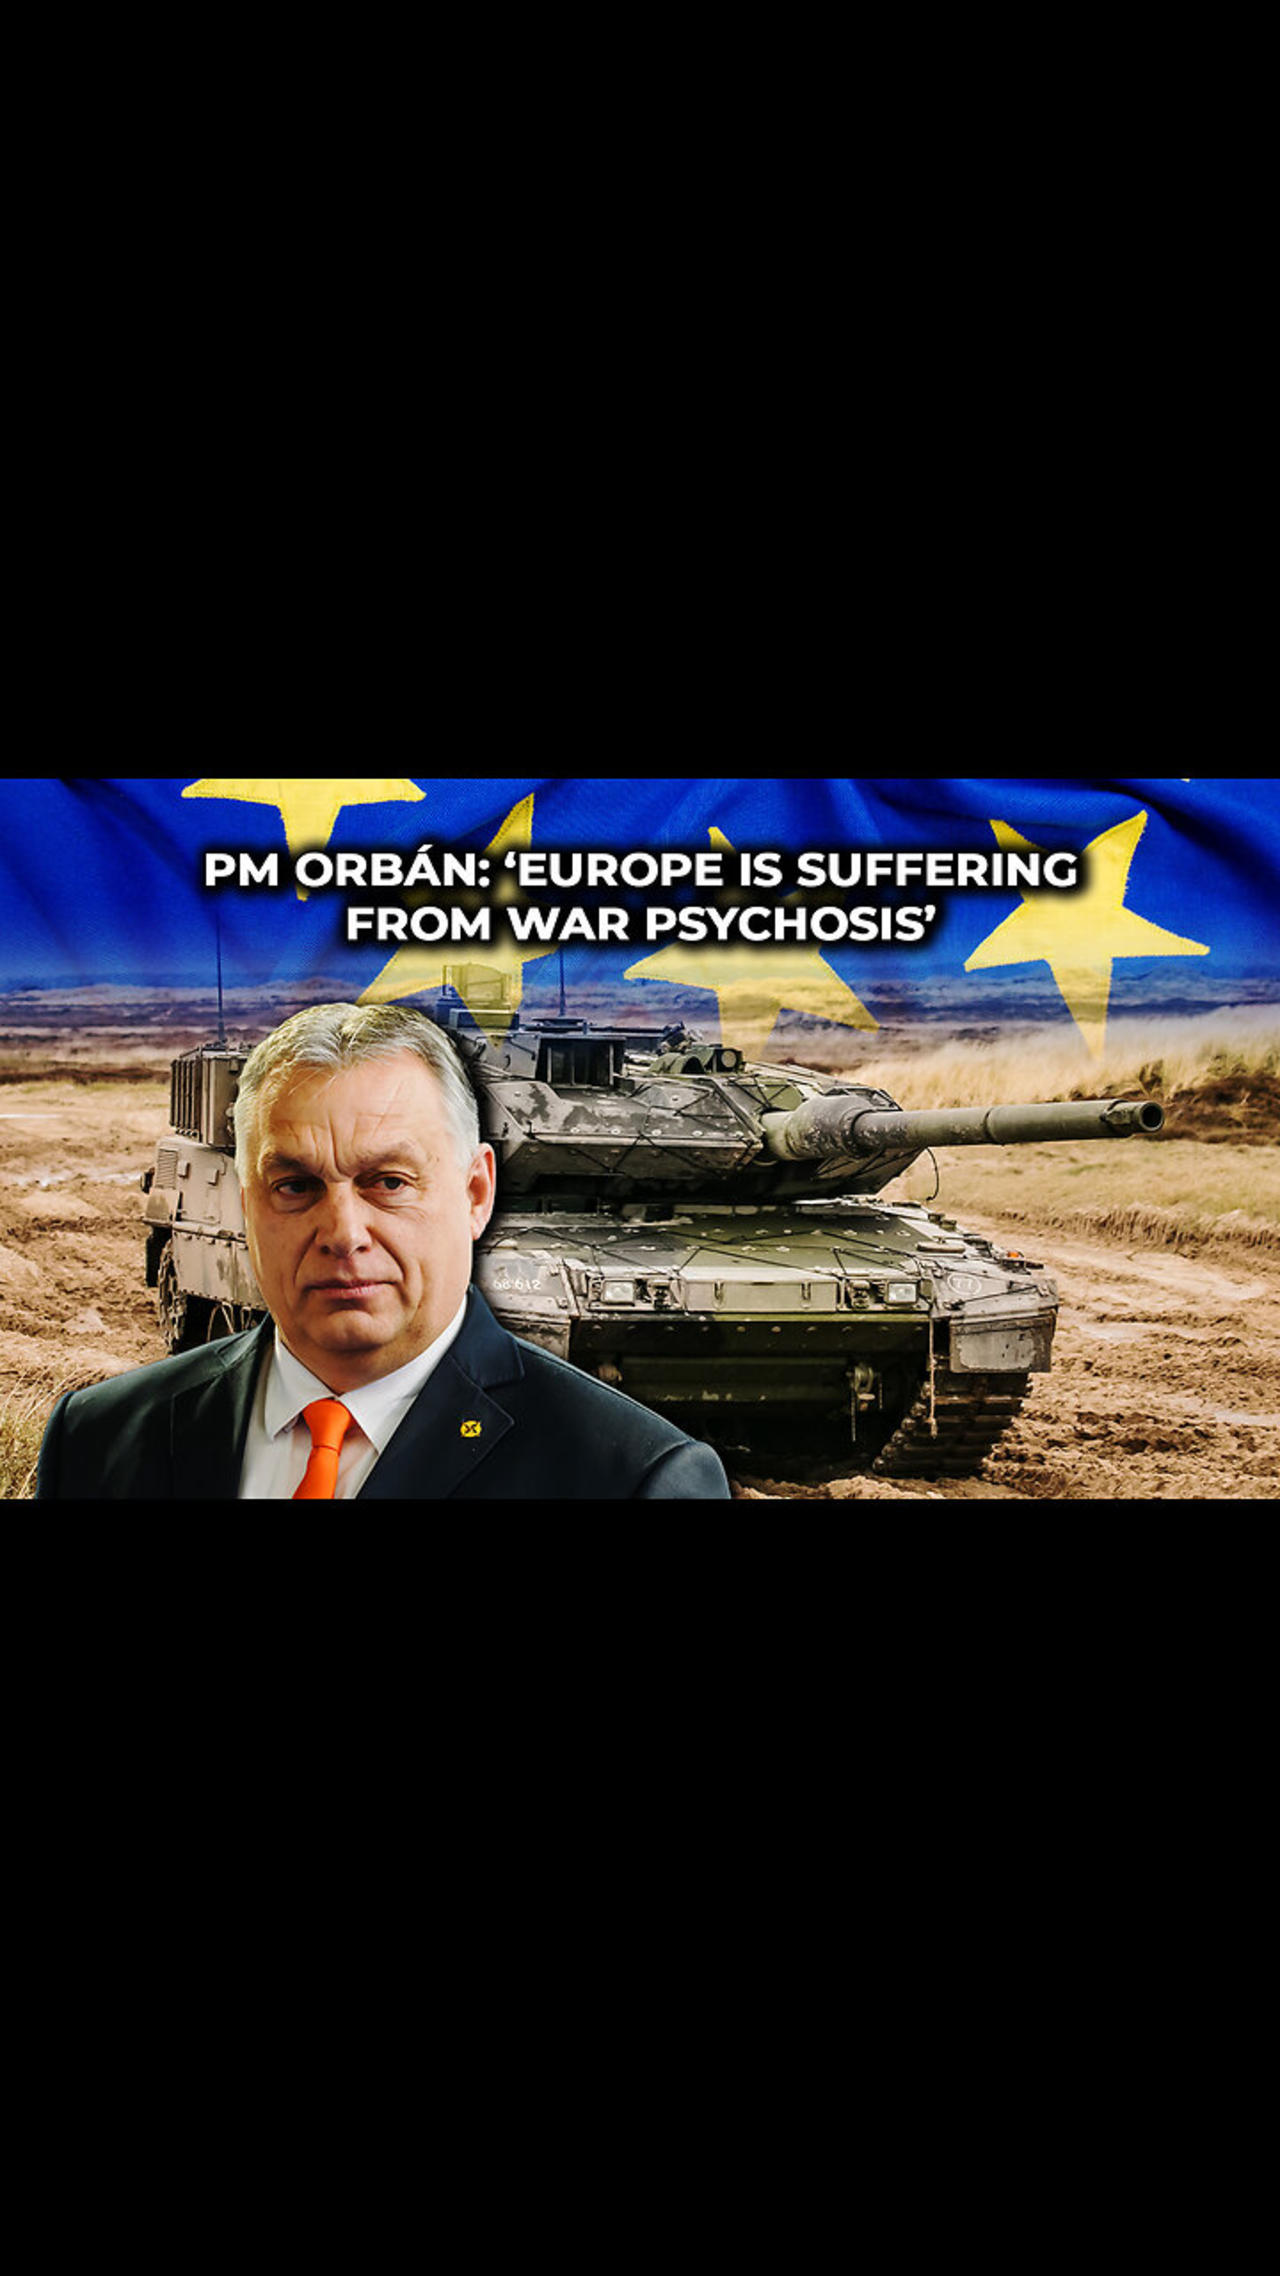 PM Orbán: ‘Europe is Suffering from War Psychosis’